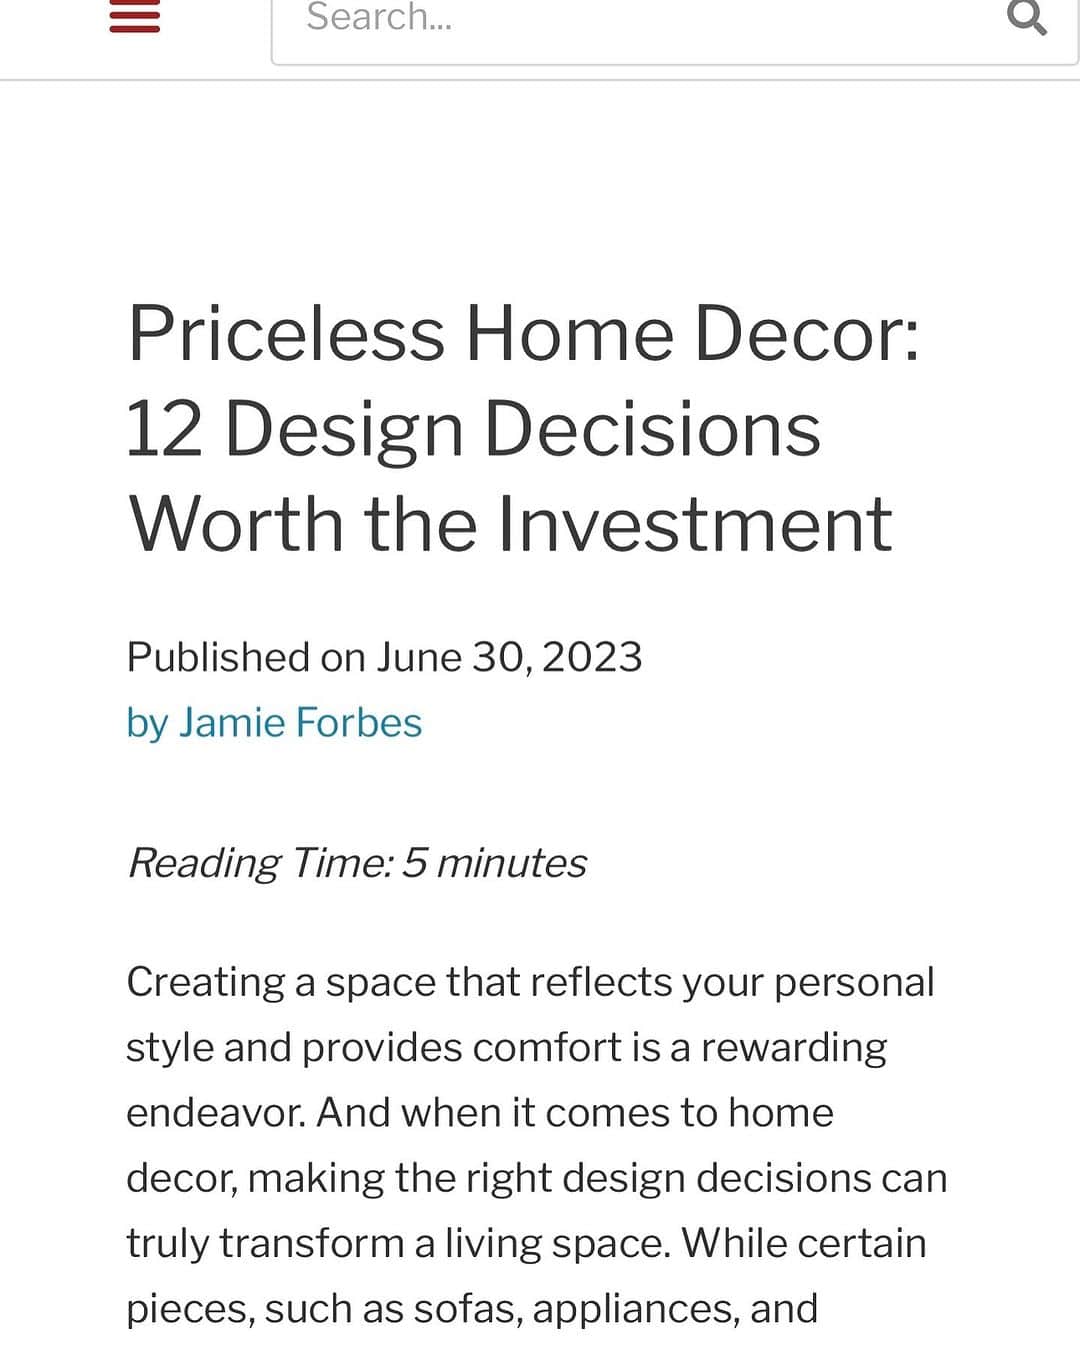 Reiko Lewisのインスタグラム：「Redfin mentioned about our design suggestion in their Blog!  You can see the post here: Priceless Home Decor: 12 Design Decisions Worth the Investment  https://www.redfin.com/blog/priceless-home-decor/  #hawaiiinteriordesign #interiordesigntips  #livebeautifully #livehappy #multifunctionalspaces #redfin #hawaiilifestyle」